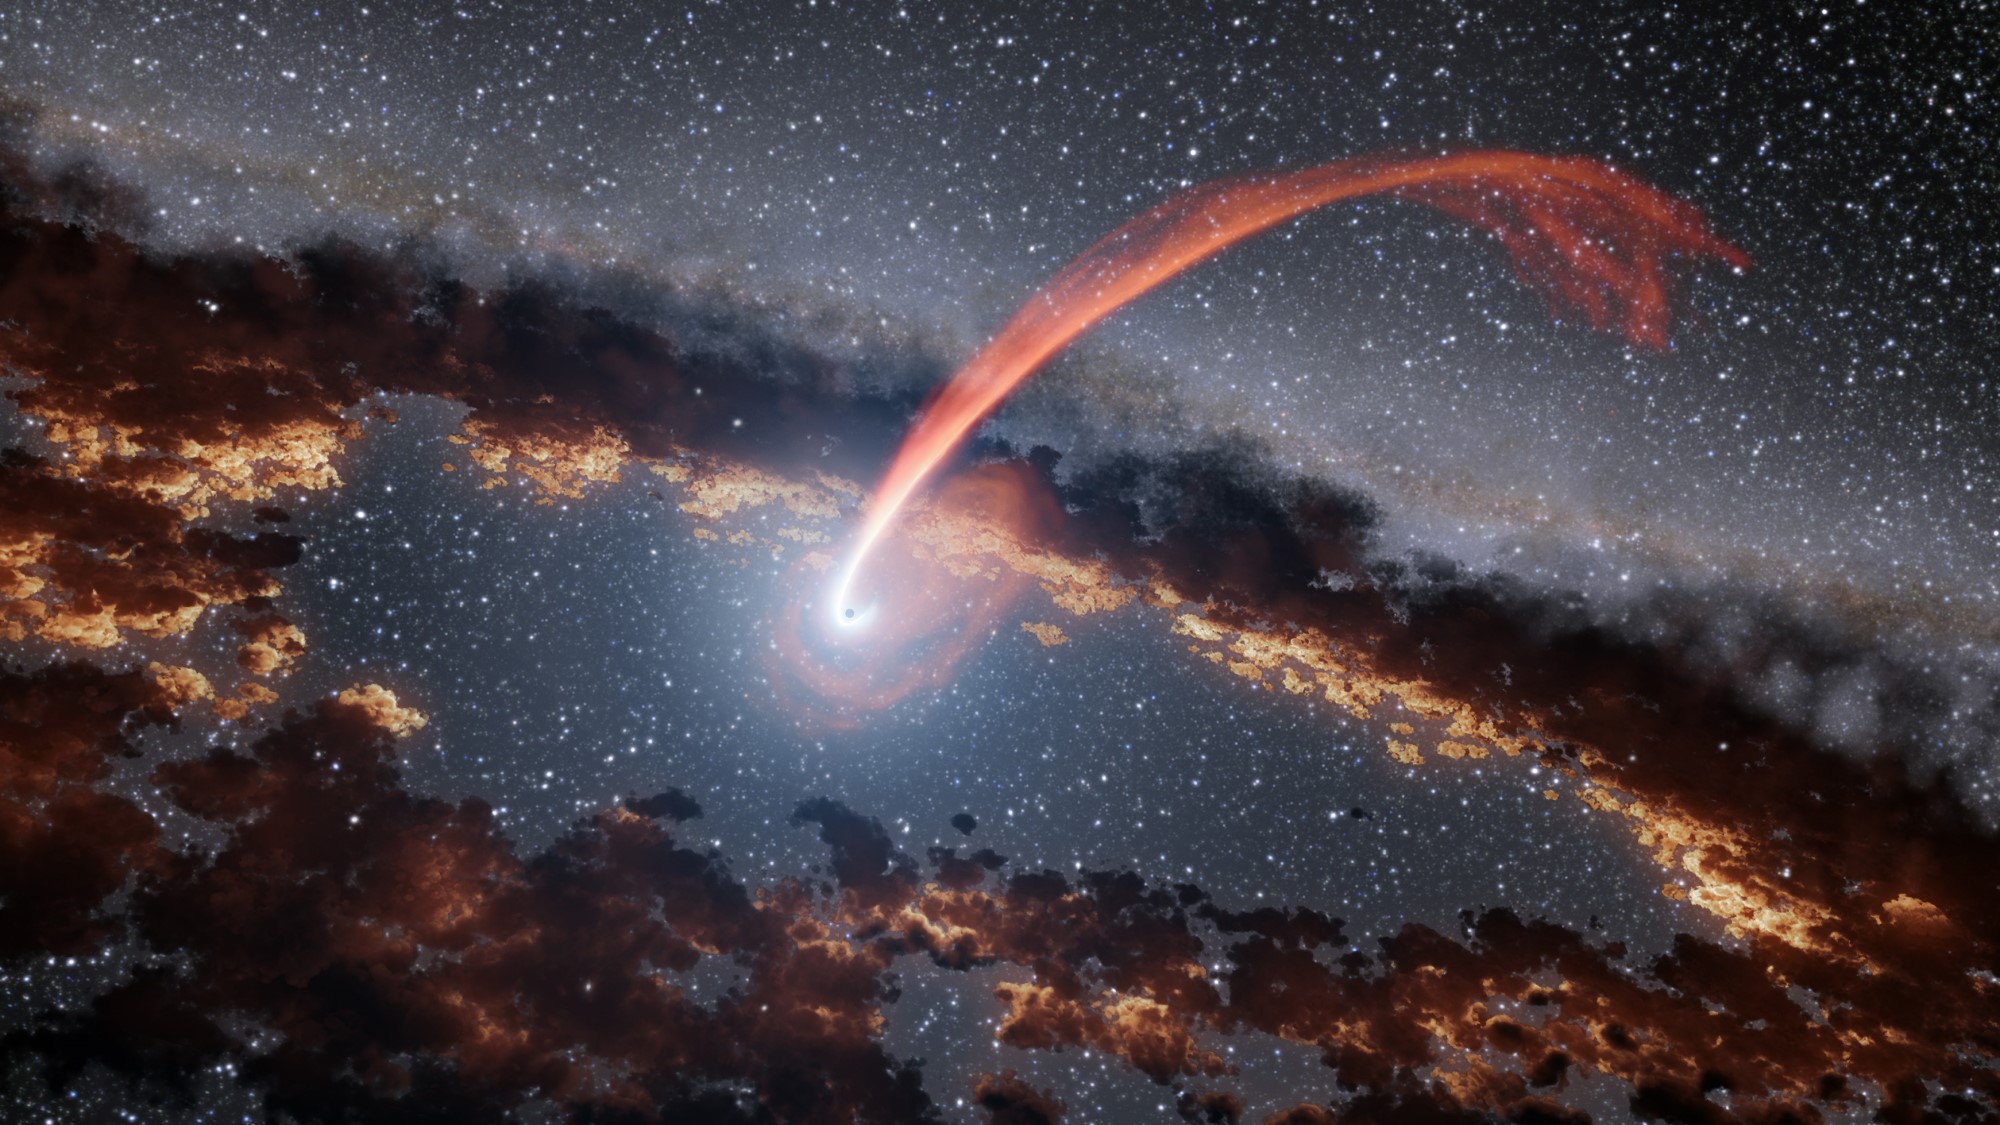 An artist's rendering of a supermassive black hole eating material from a star.